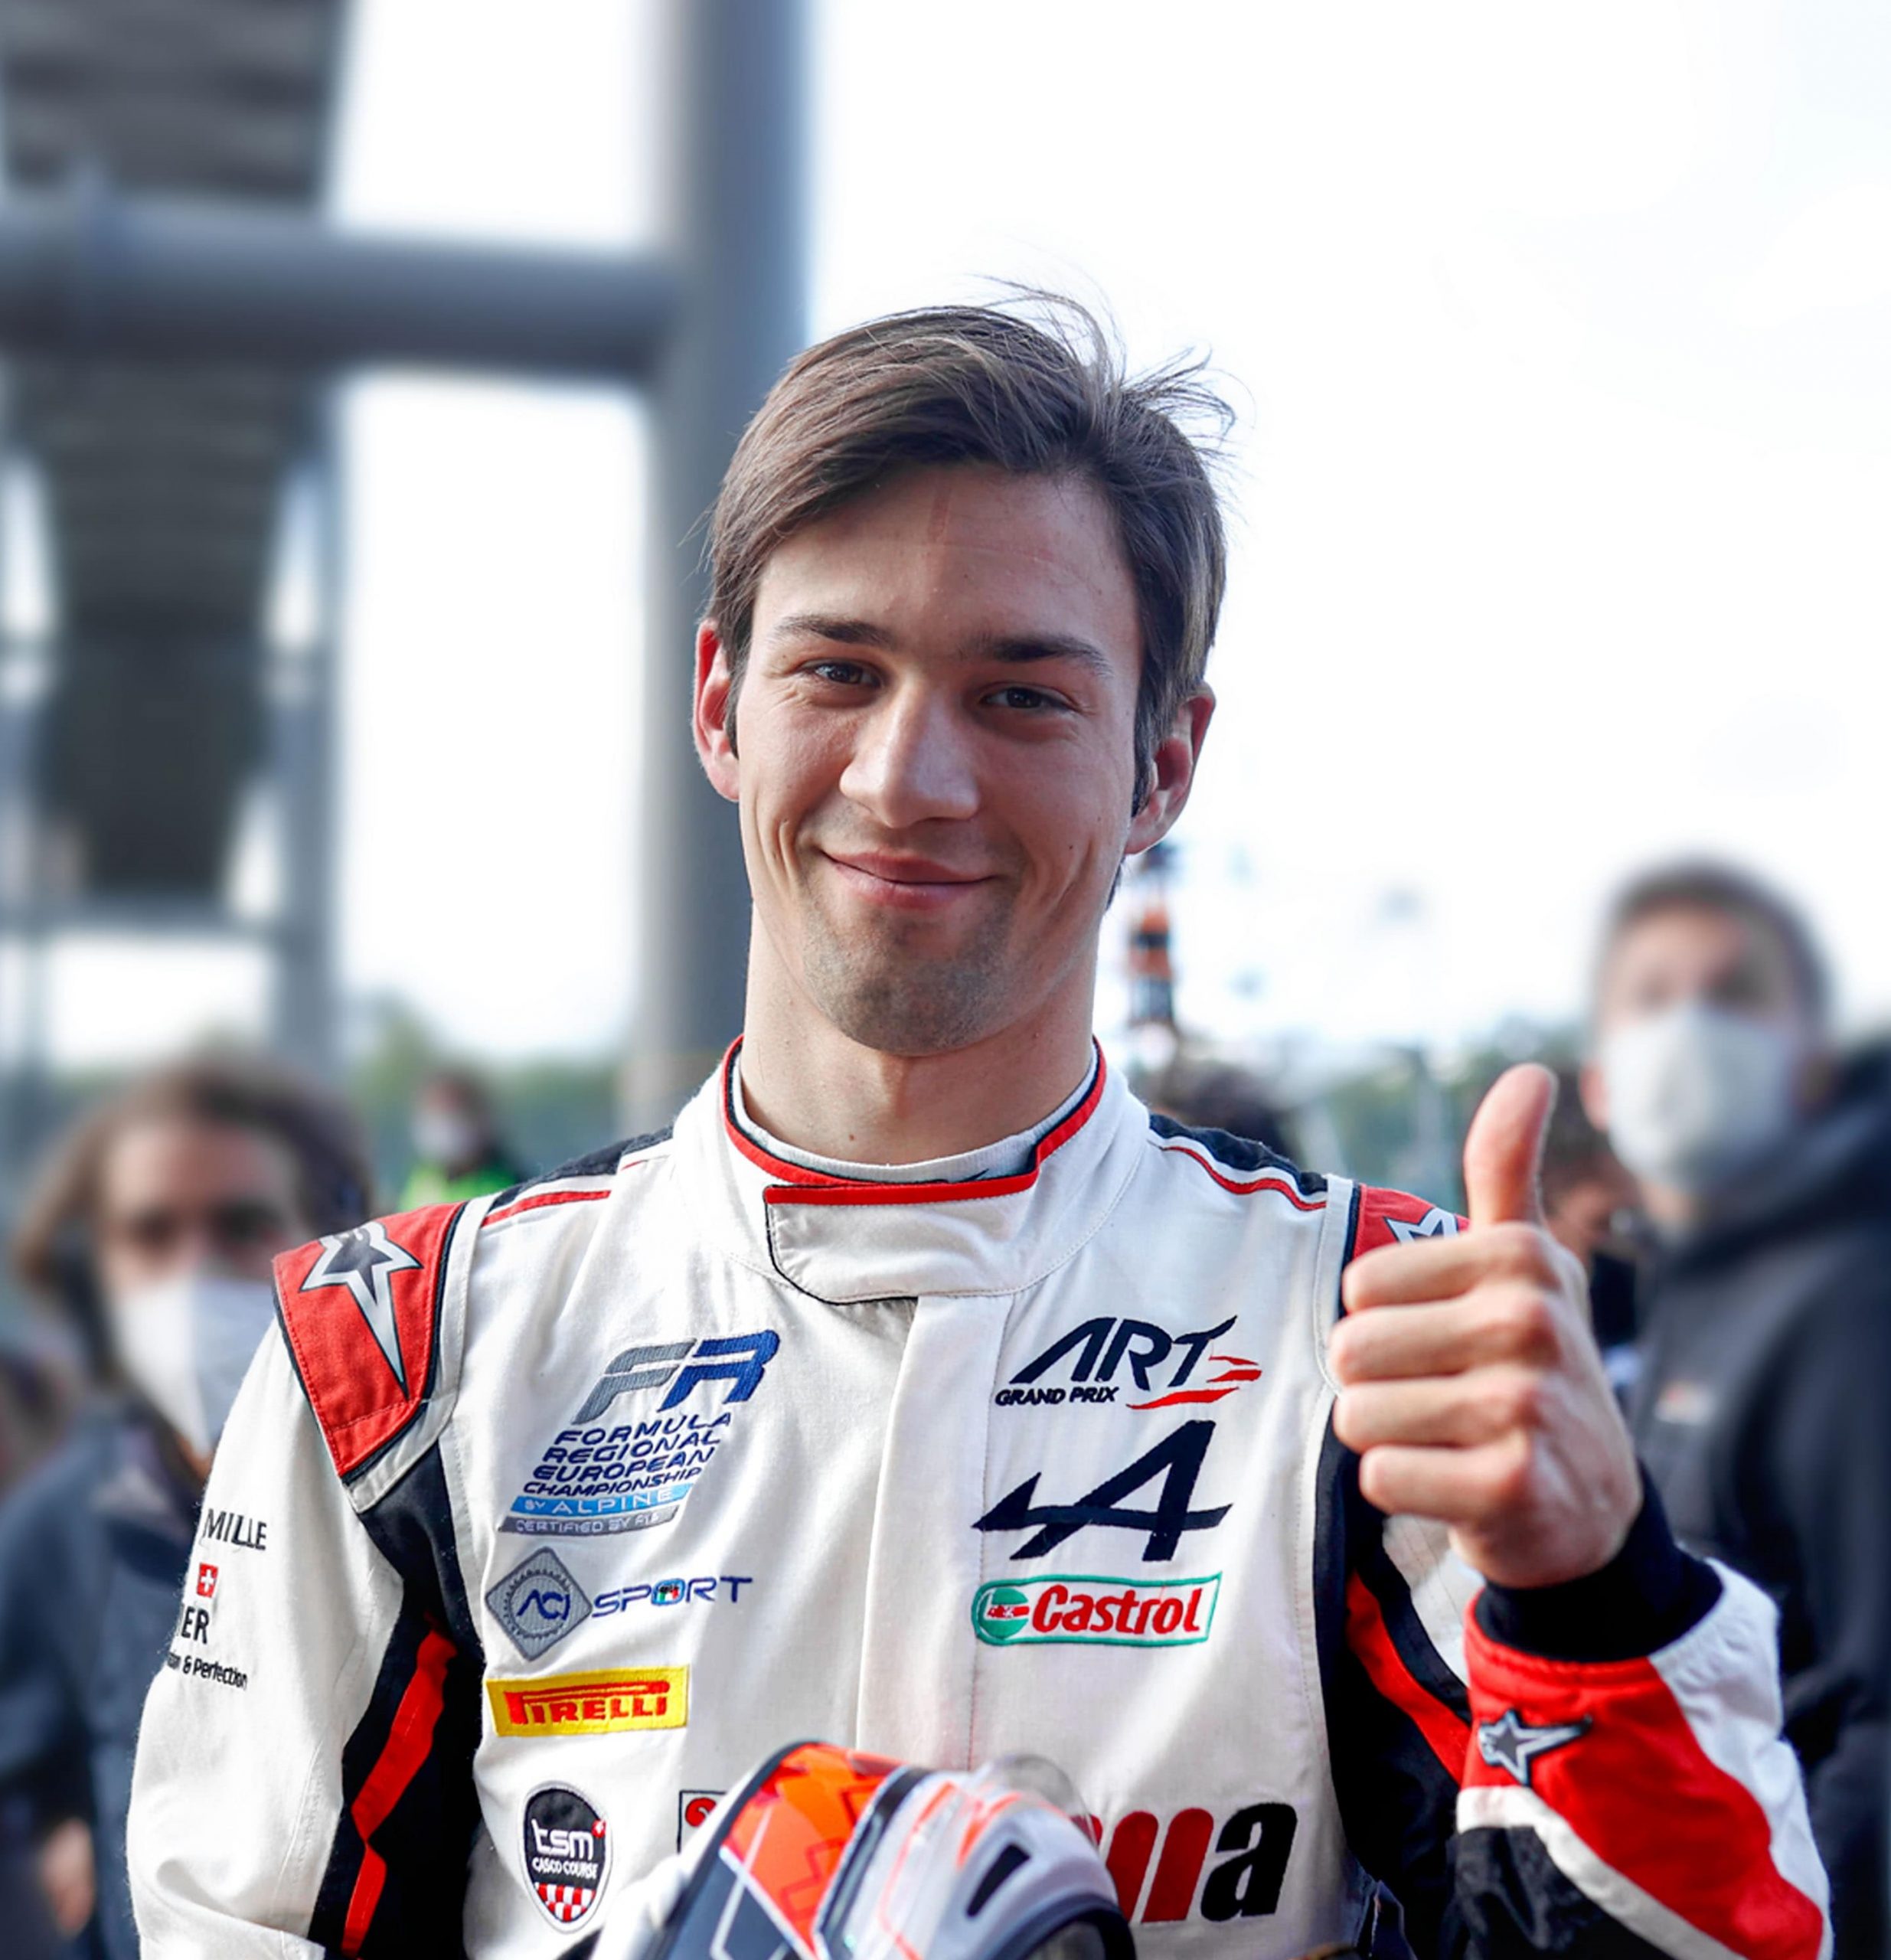 Grégoire Saucy moves up to FIA Formula 3 for the 2022 campaign